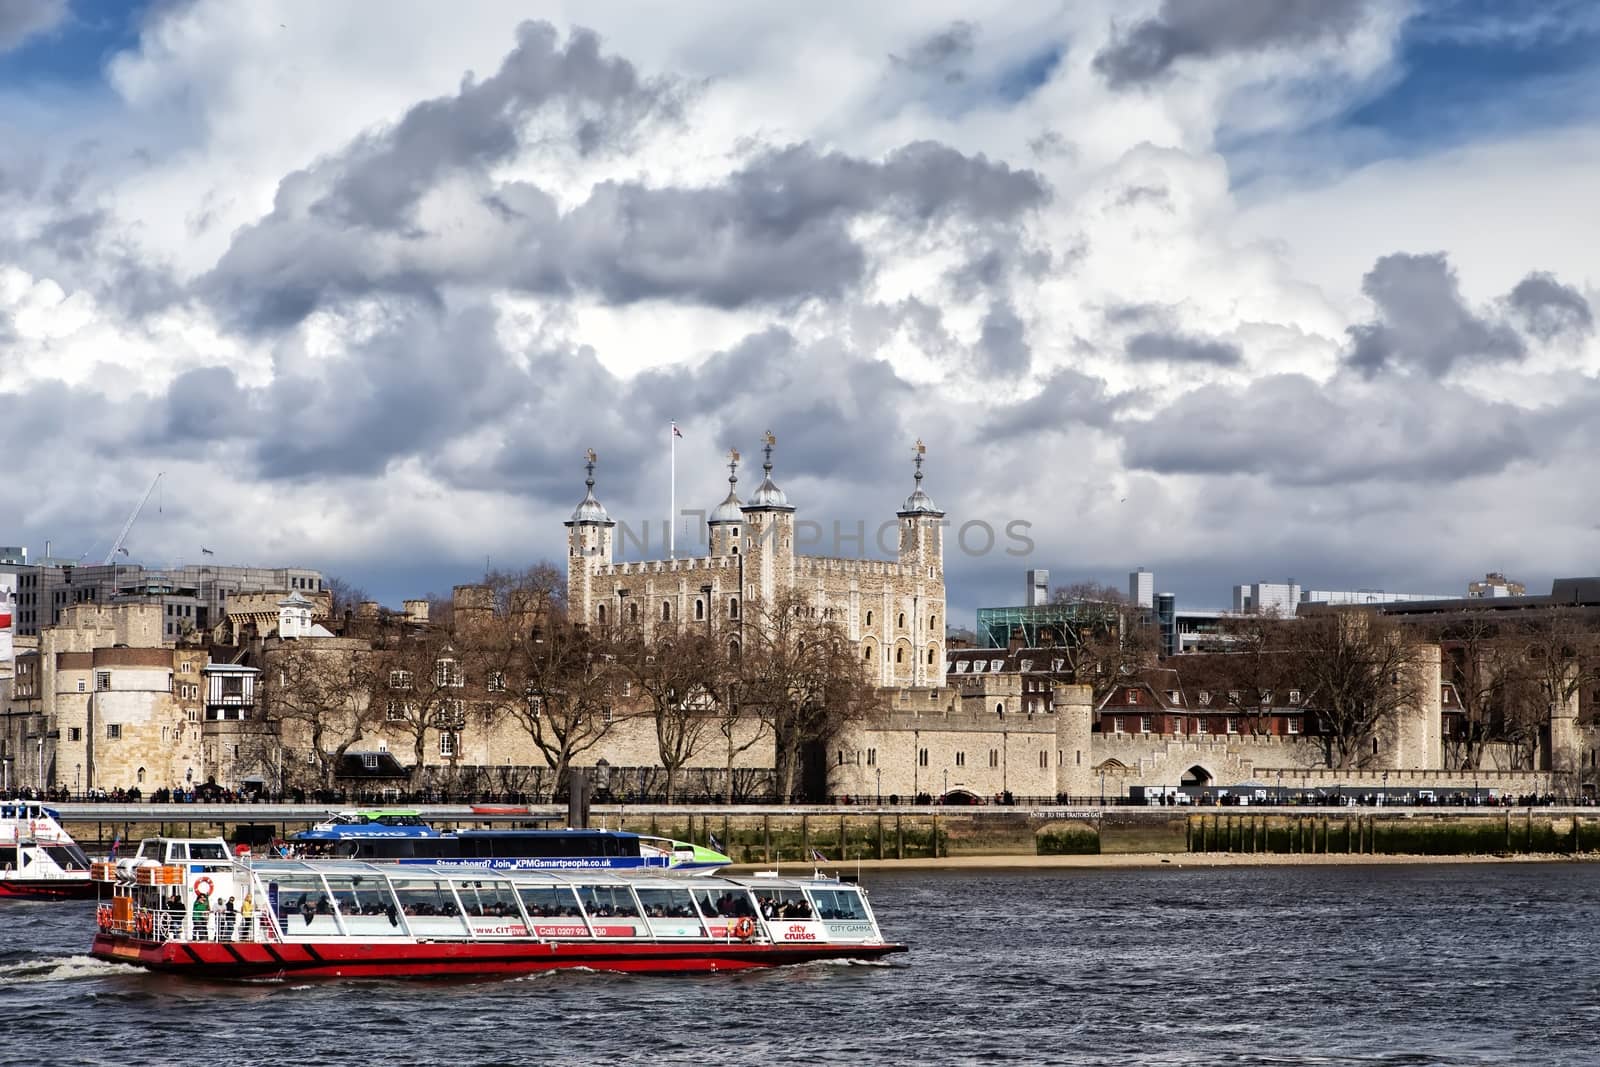  The historic castle Tower of London by mitakag